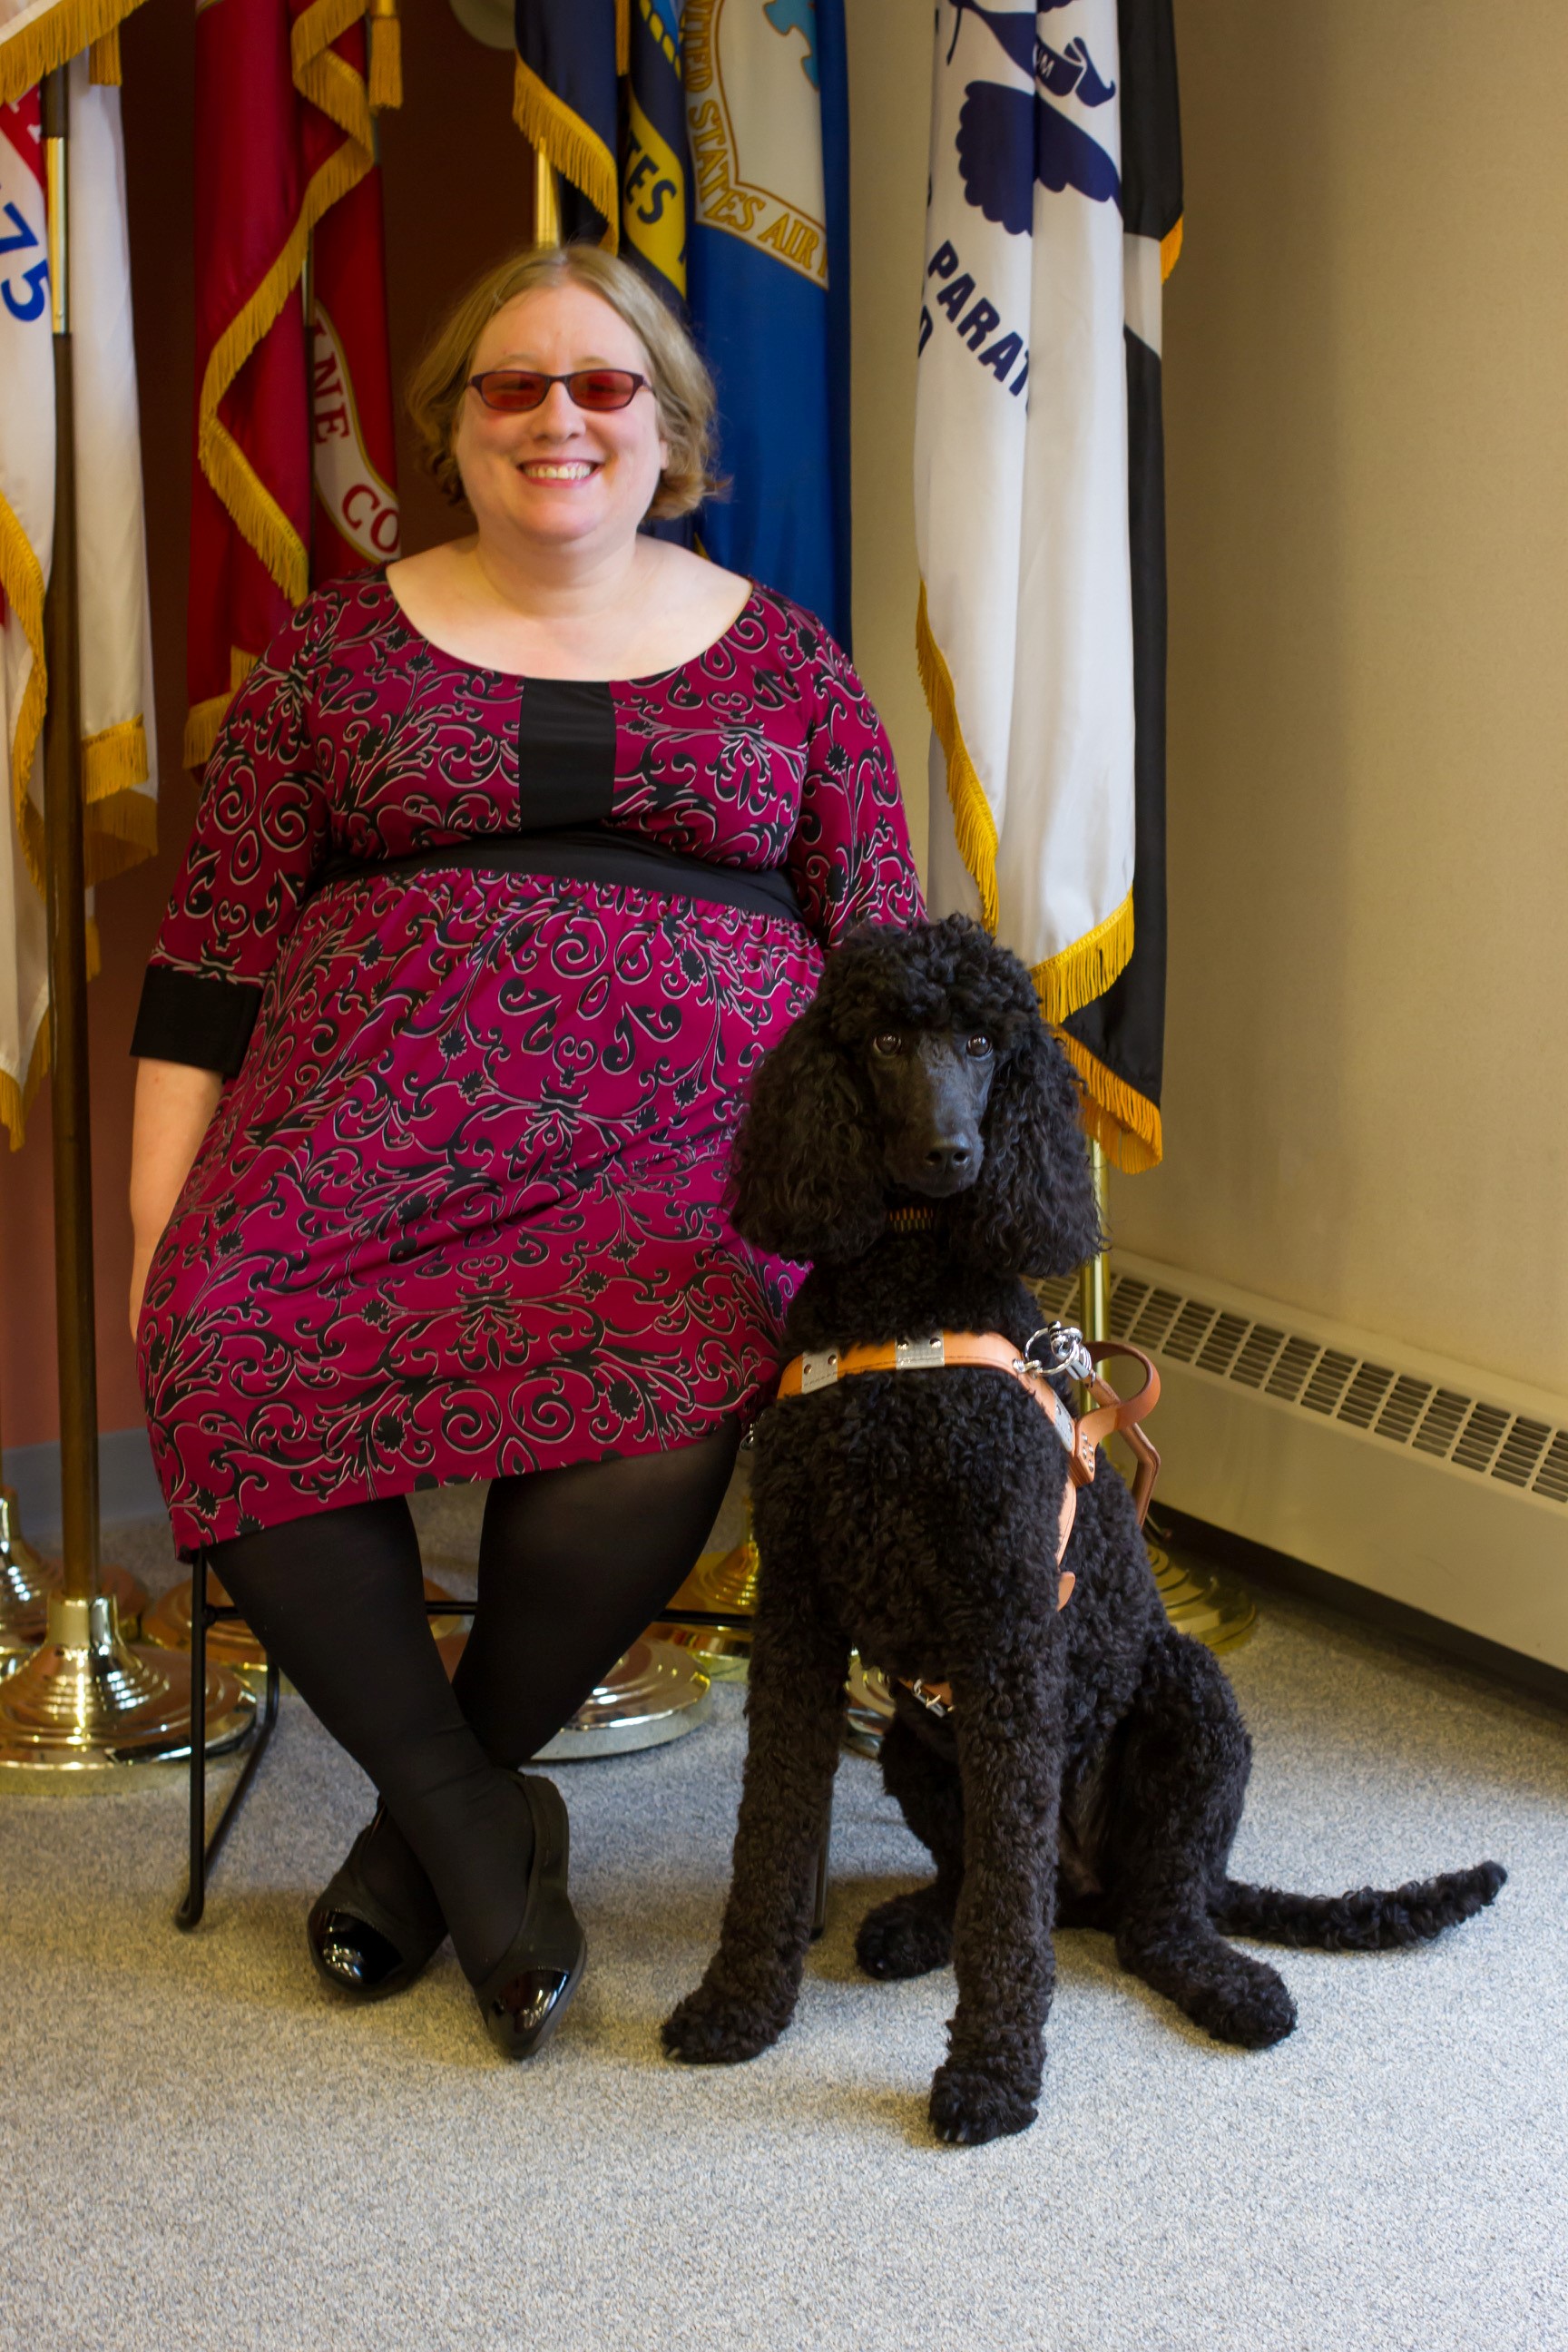 Rachel Tanenhaus seated next to her guide dog